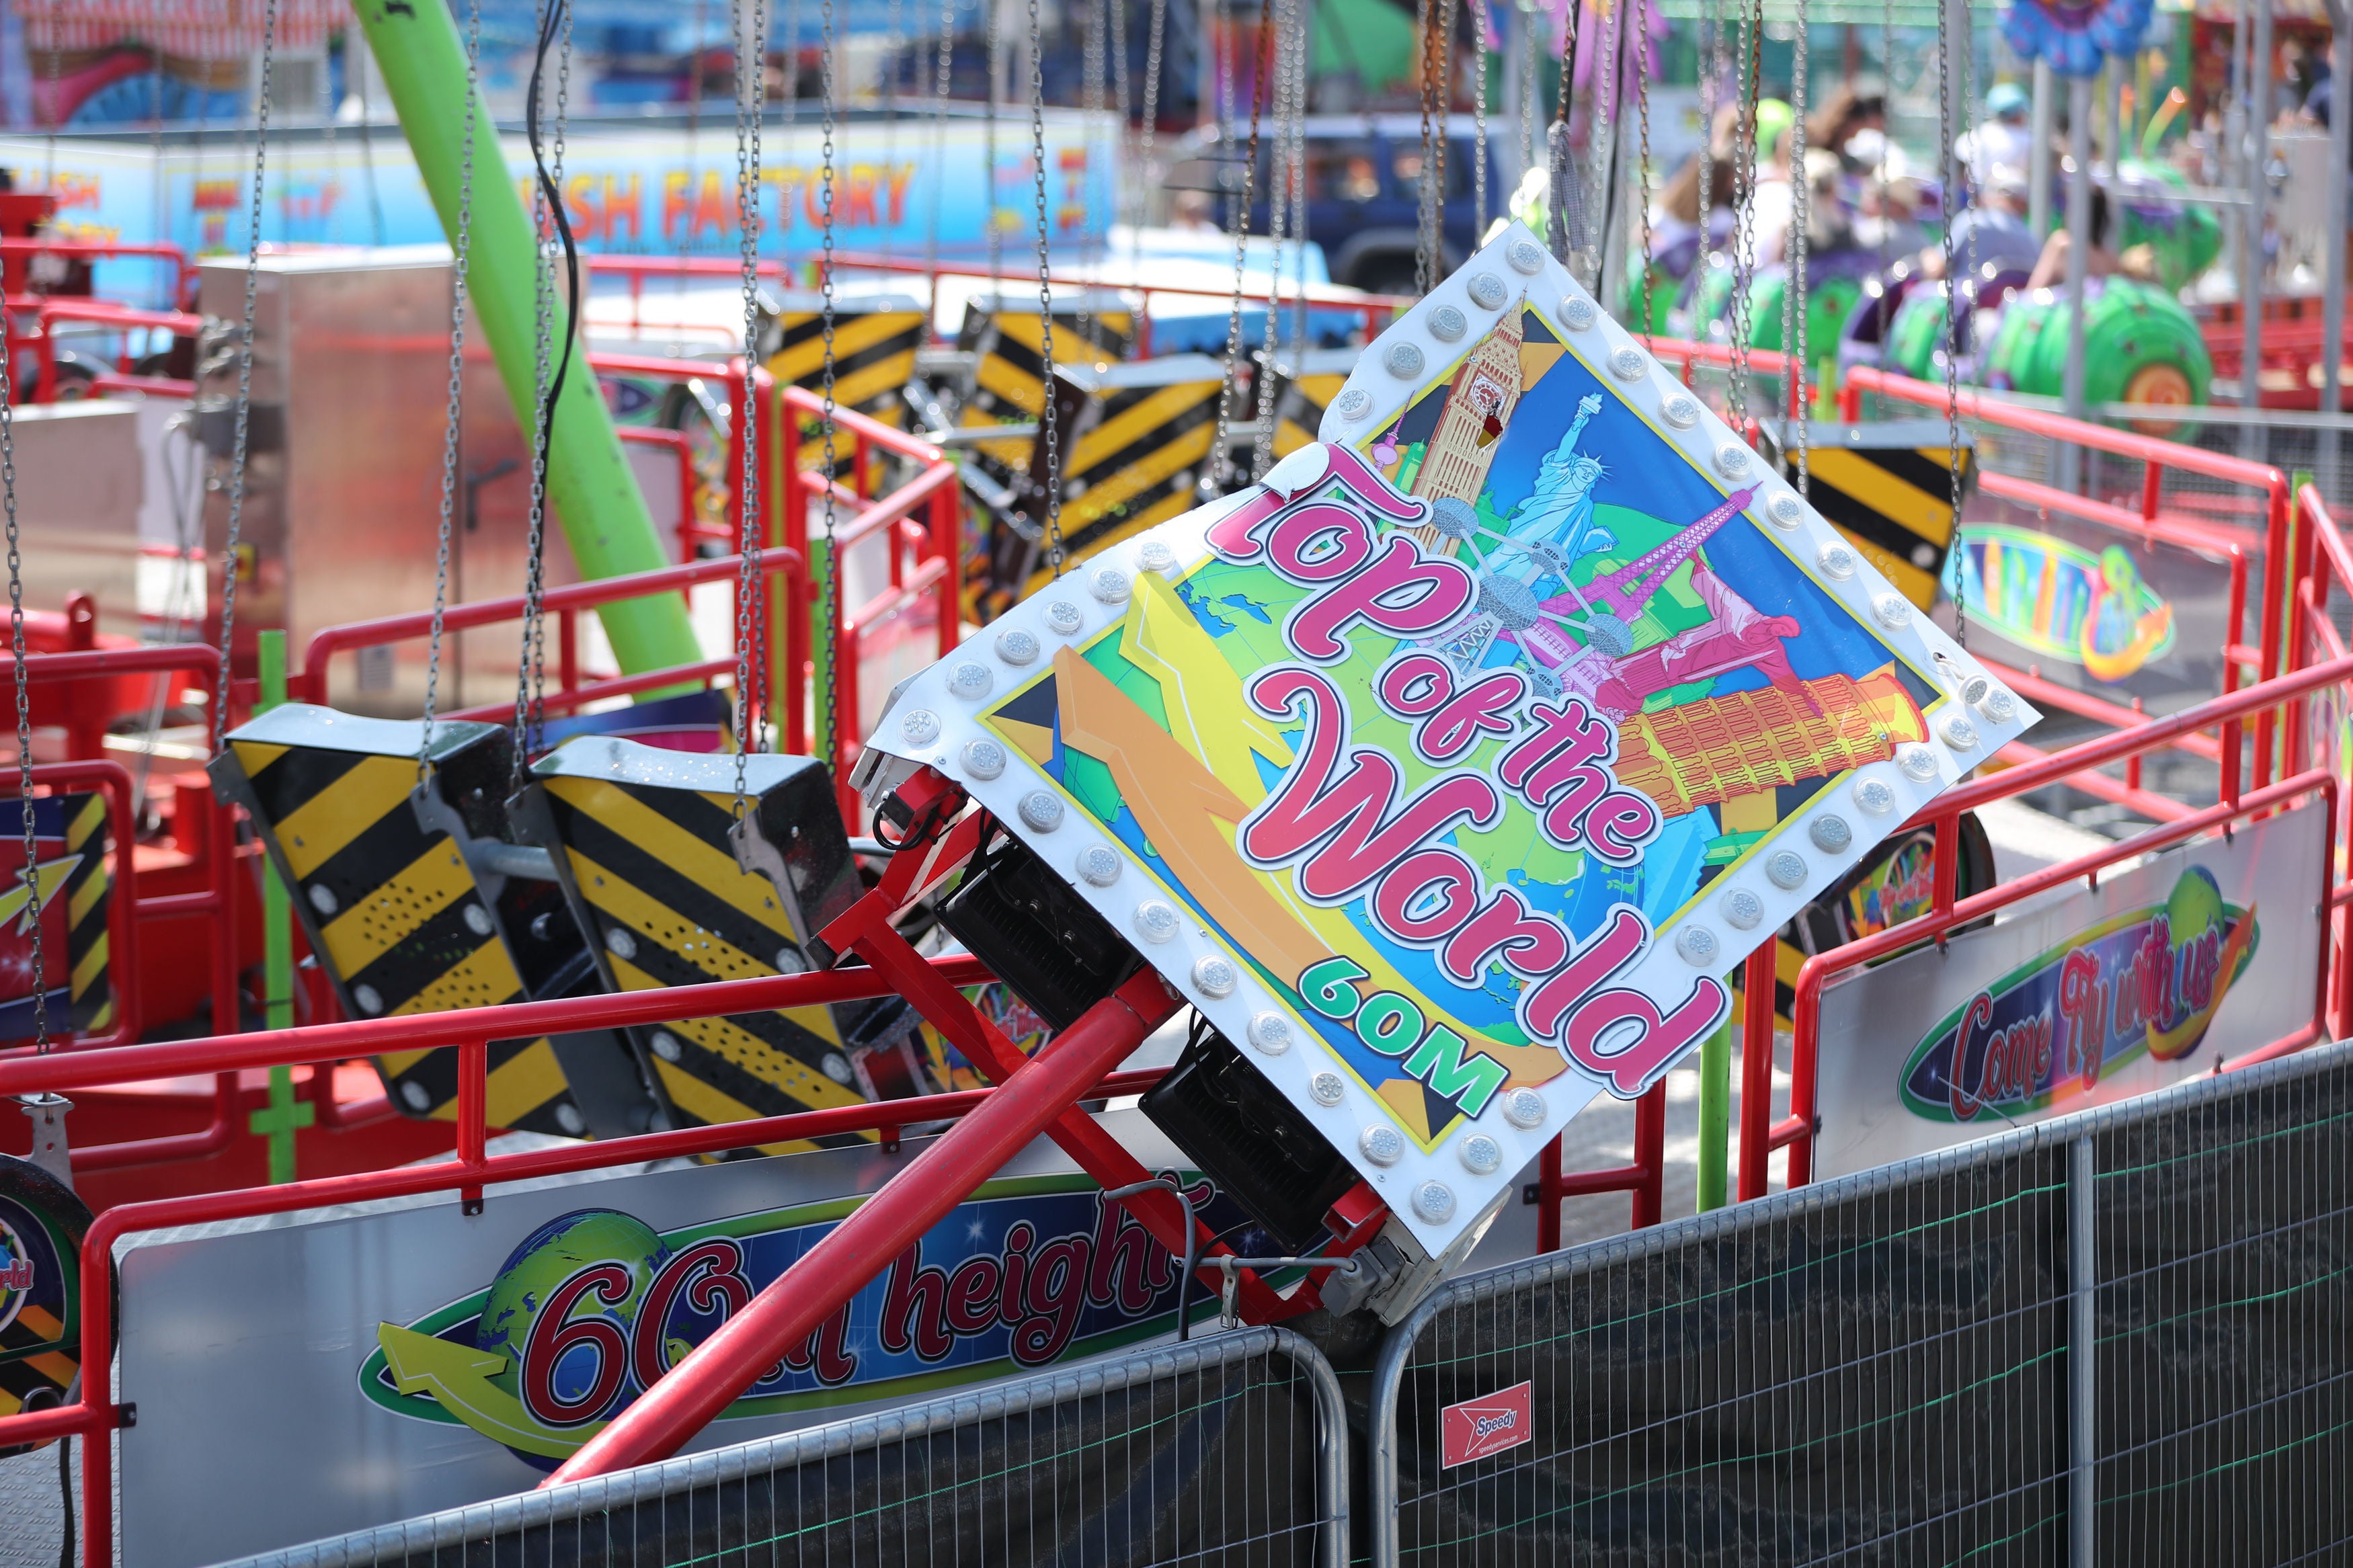 The Star Flyer funfair ride at Planet Fun in Carrickfergus, Co Antrim, which collapsed on Saturday evening, injuring six people